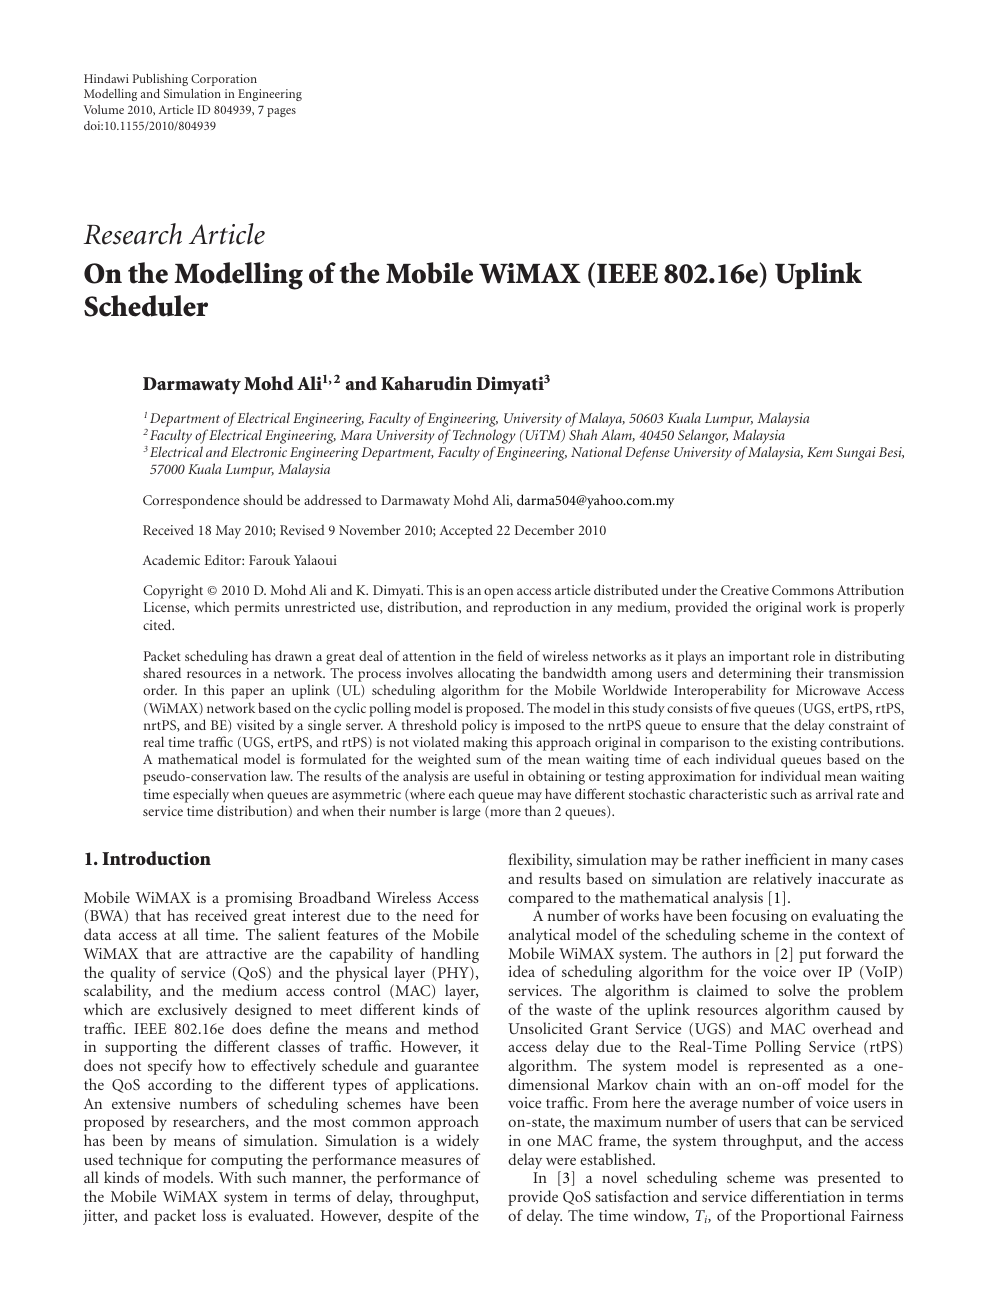 On The Modelling Of The Mobile Wimax Ieee 802 16e Uplink Scheduler Topic Of Research Paper In Electrical Engineering Electronic Engineering Information Engineering Download Scholarly Article Pdf And Read For Free On